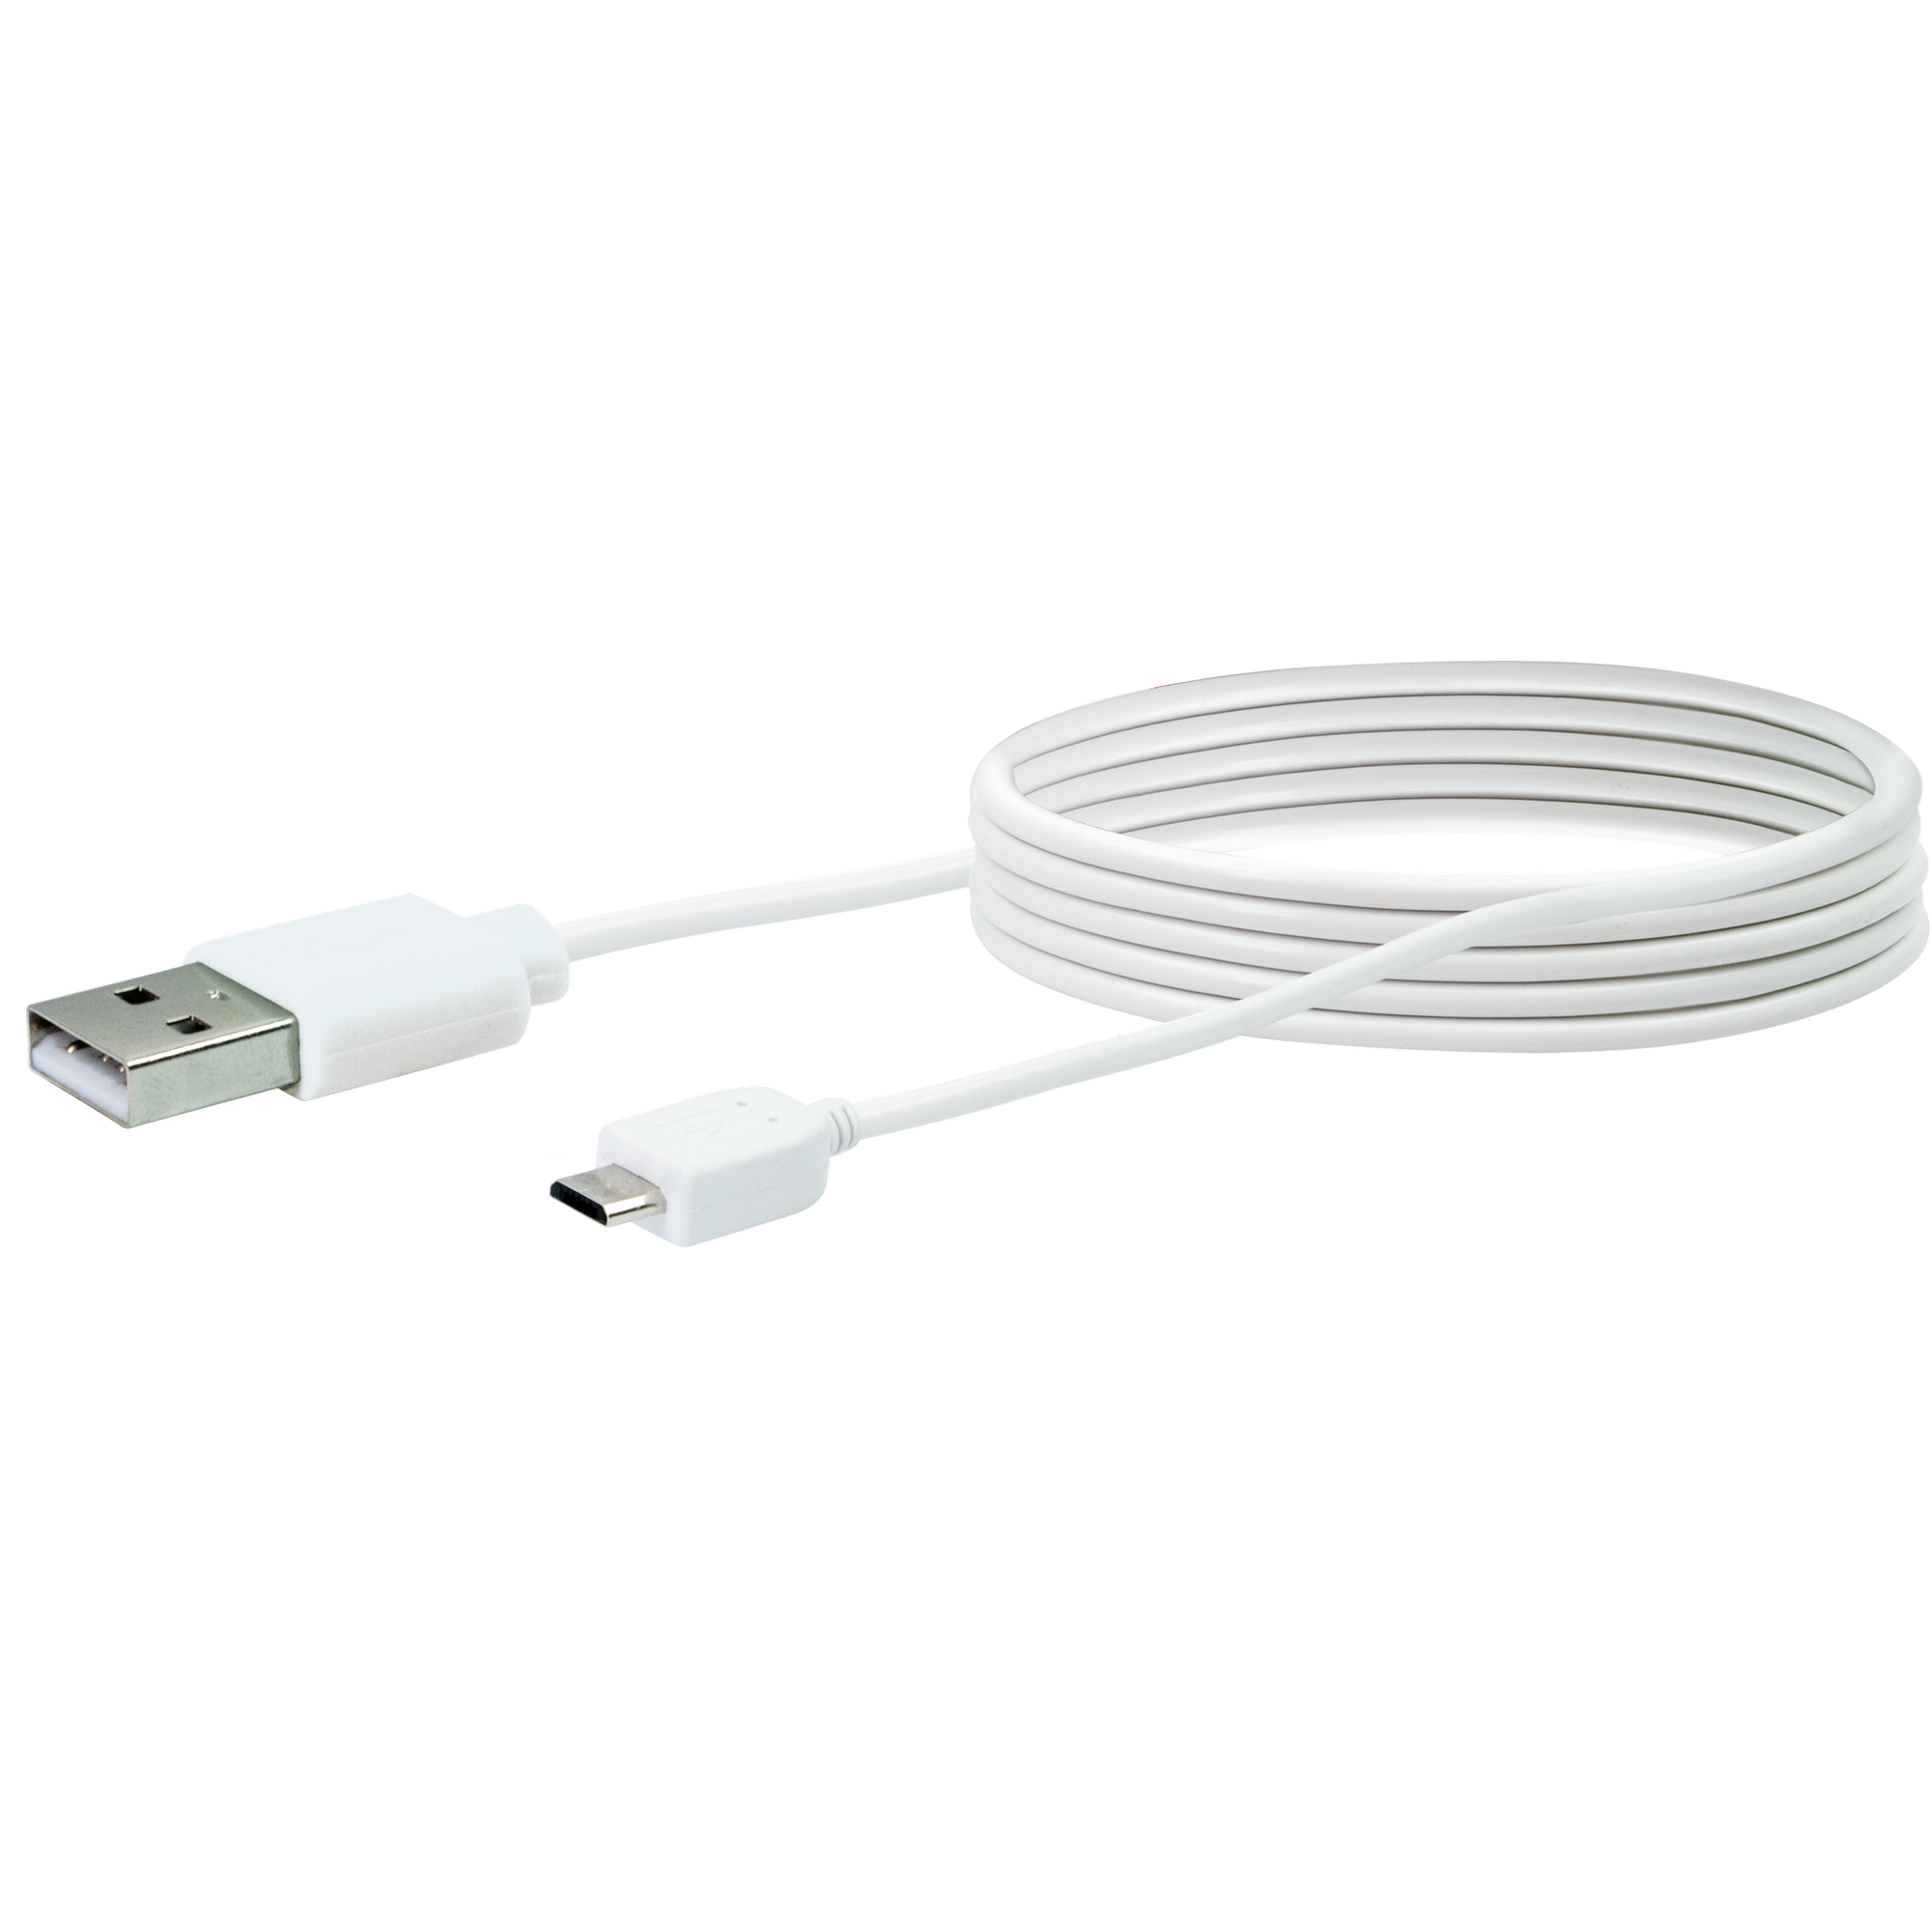 Sync- und Ladekabel Micro USB 2.0 B/USB 2.0 A, 200 cm + product picture